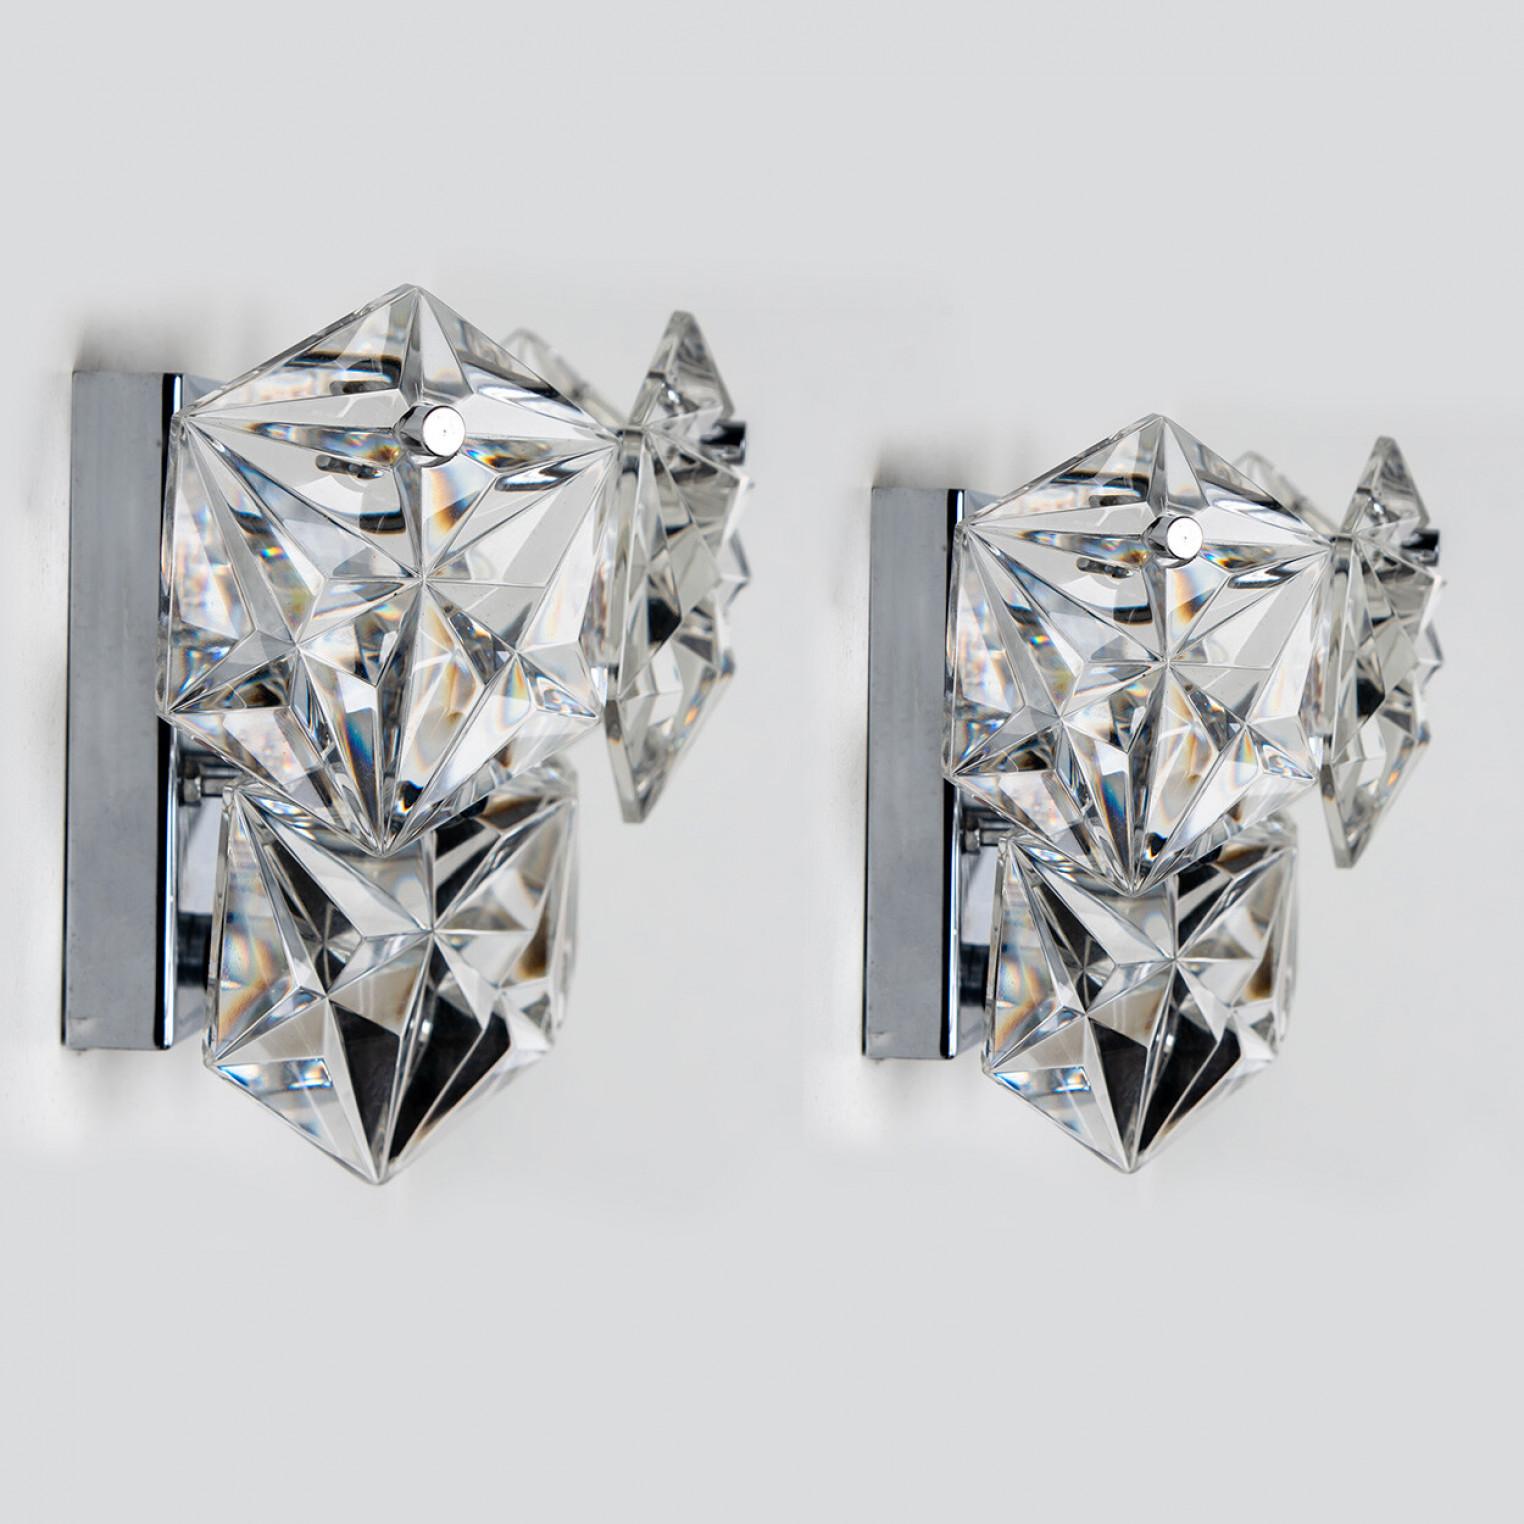 1 of the 2 Faceted Crystal and Silver Chrome Sconces by Kinkeldey, Germany, 1970 For Sale 2